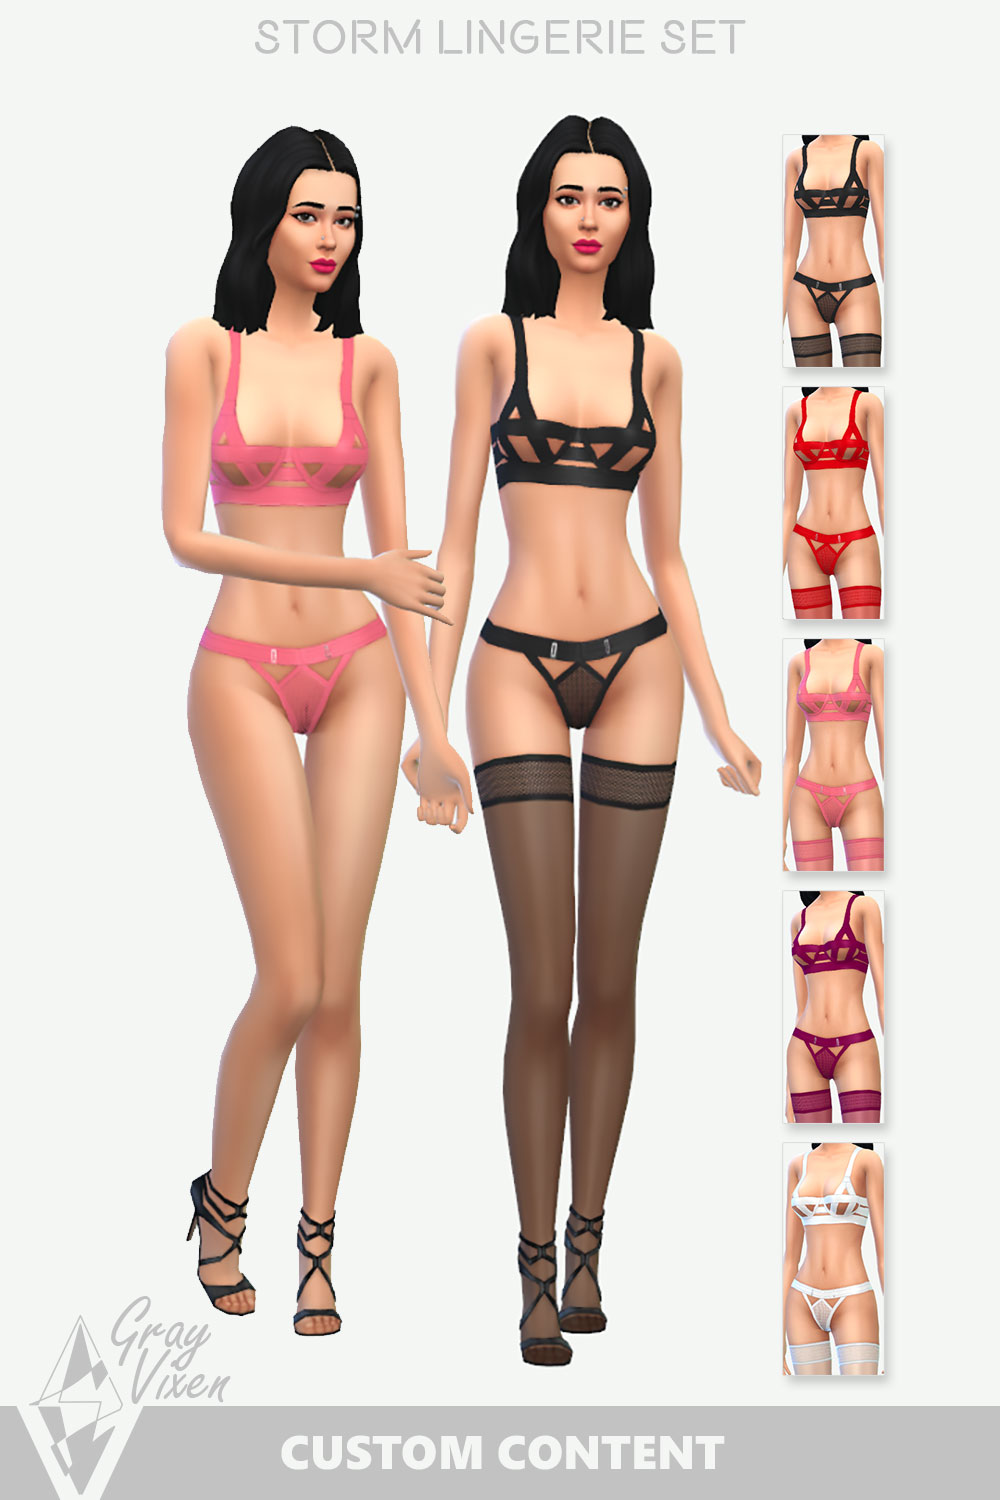 The Sims 4 Sexy Lingerie Custom Content